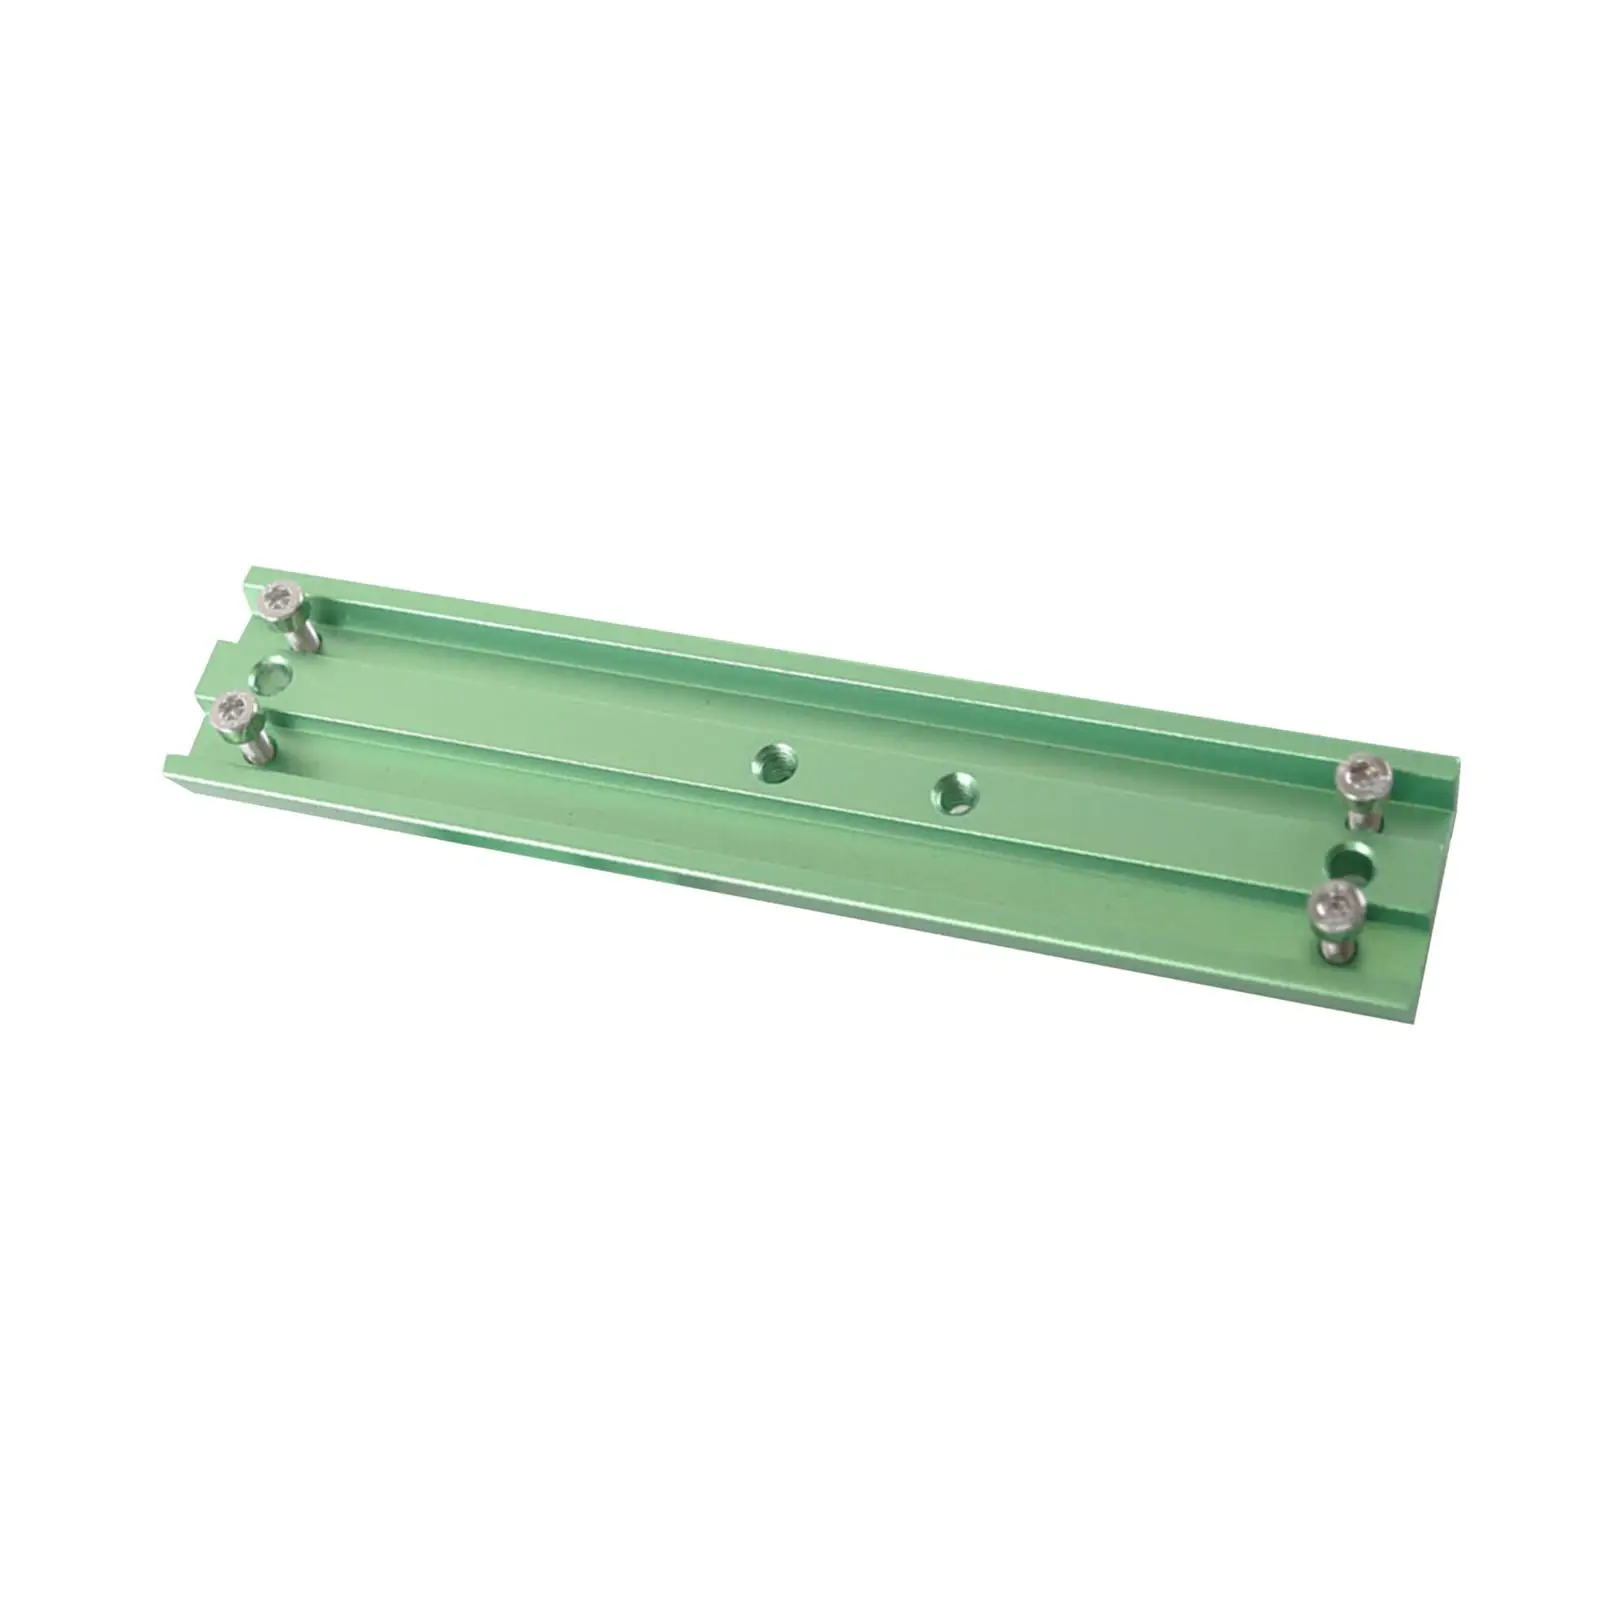 210mm Dovetail Mounting Plate for Astronomical Telescope Universal Green